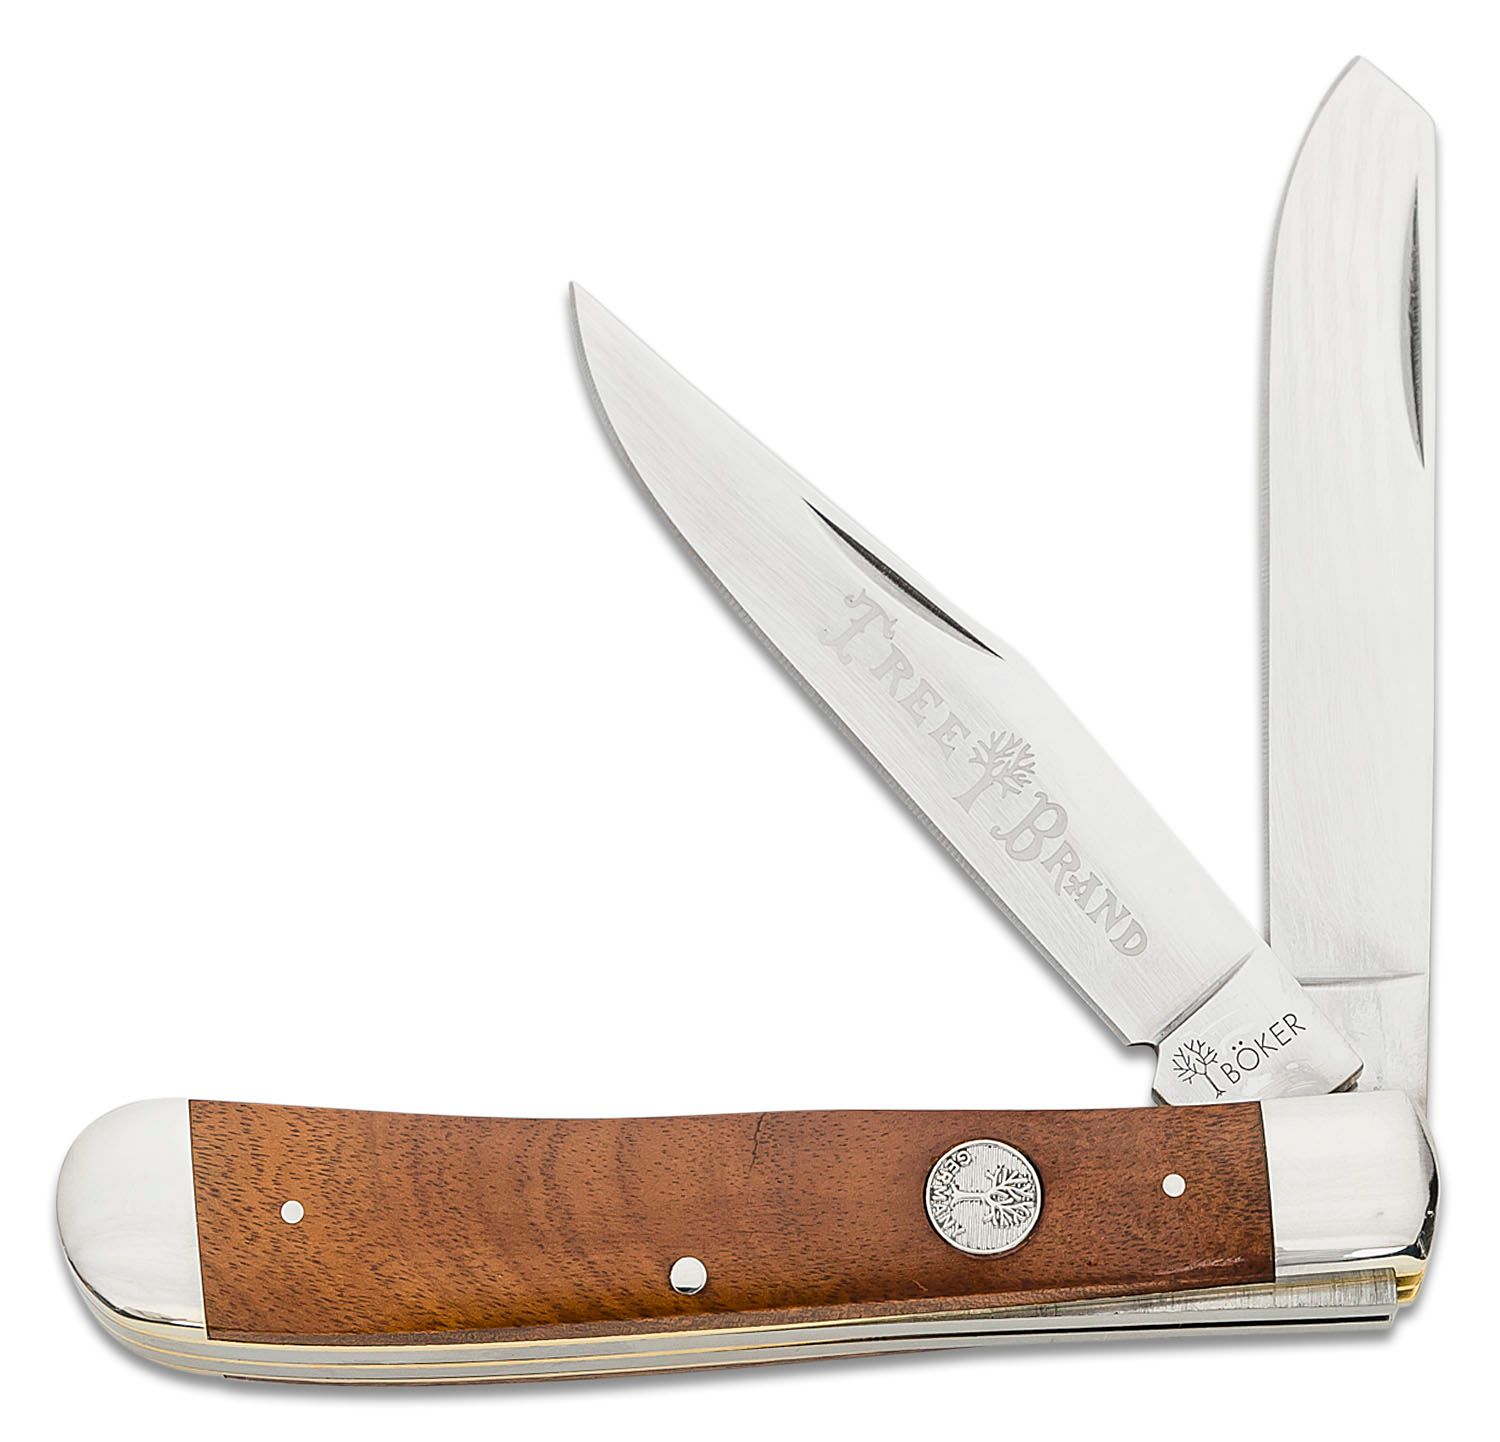 Boker Traditional Series 2.0 Trapper, Smooth Rosewood Handles with